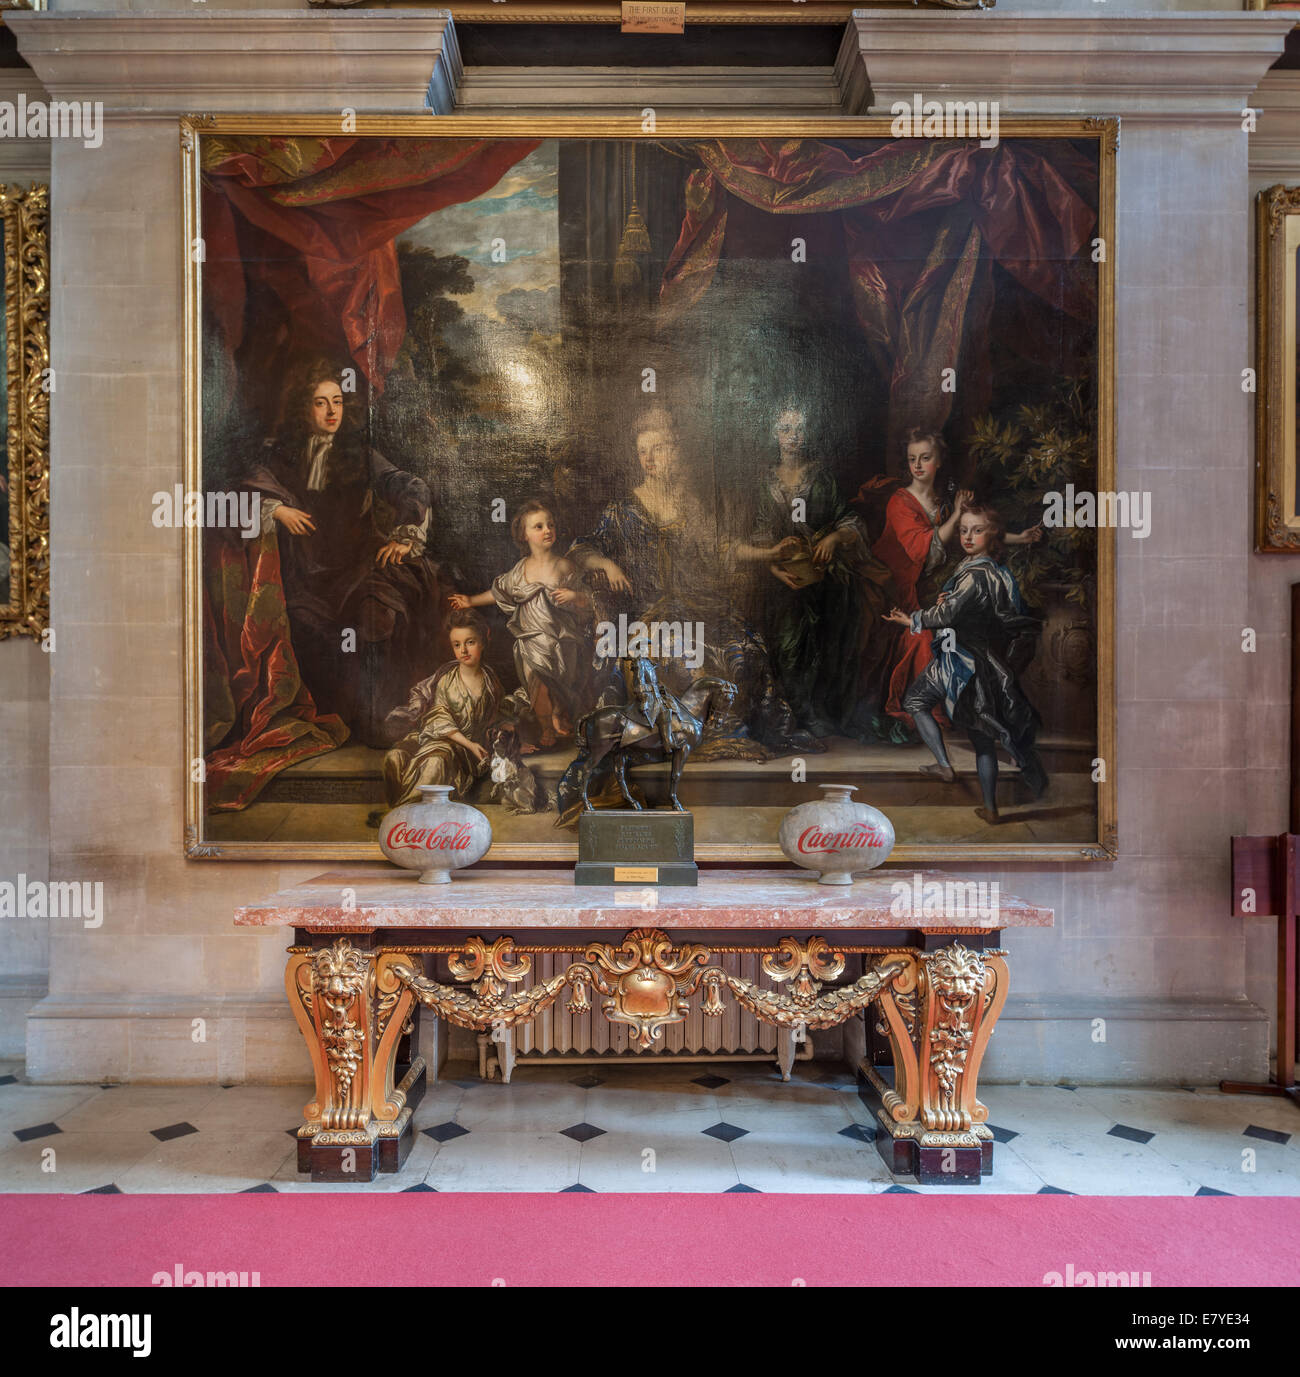 Woodstock, Oxfordshire, UK, Friday 26th September 2014 Preview of Ai Weiwei at Blenheim Palace, Blenheim Art Foundation's inaugural exhibition, opening to the public on 1st October 2014 Han Dynasty Vase with Coca Cola and Caonima Logo, Great Hall West side © Nikreates/Alamy Stock Photo